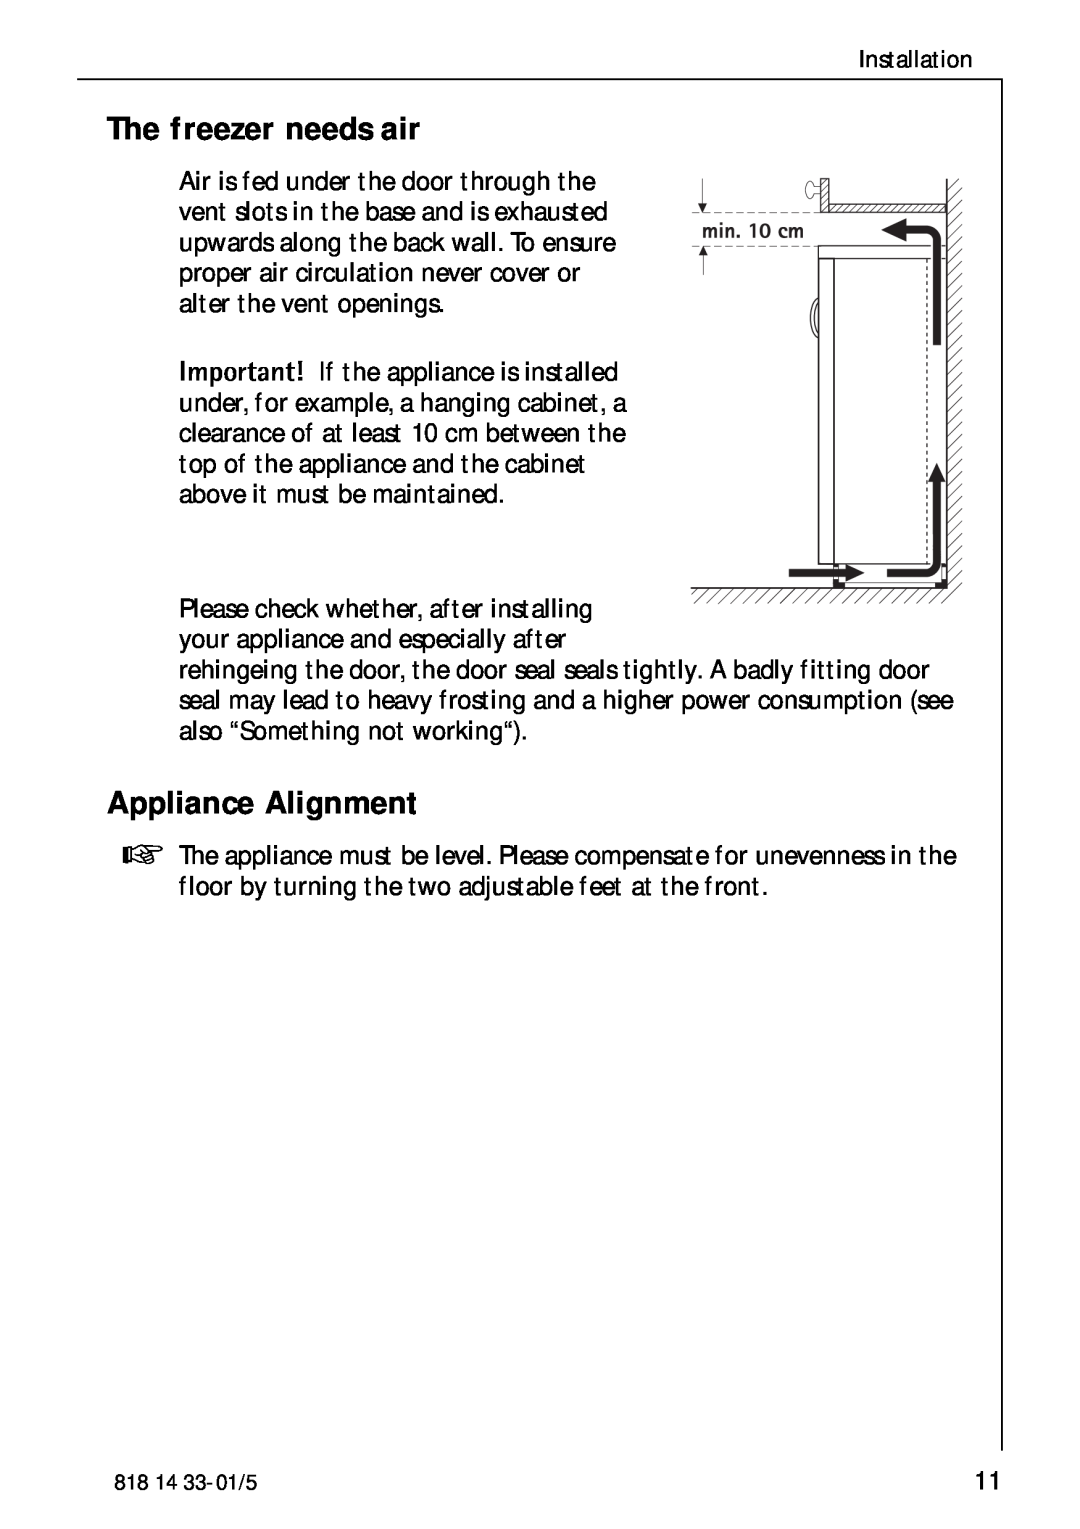 AEG 2150-6GS manual The freezer needs air, Appliance Alignment 